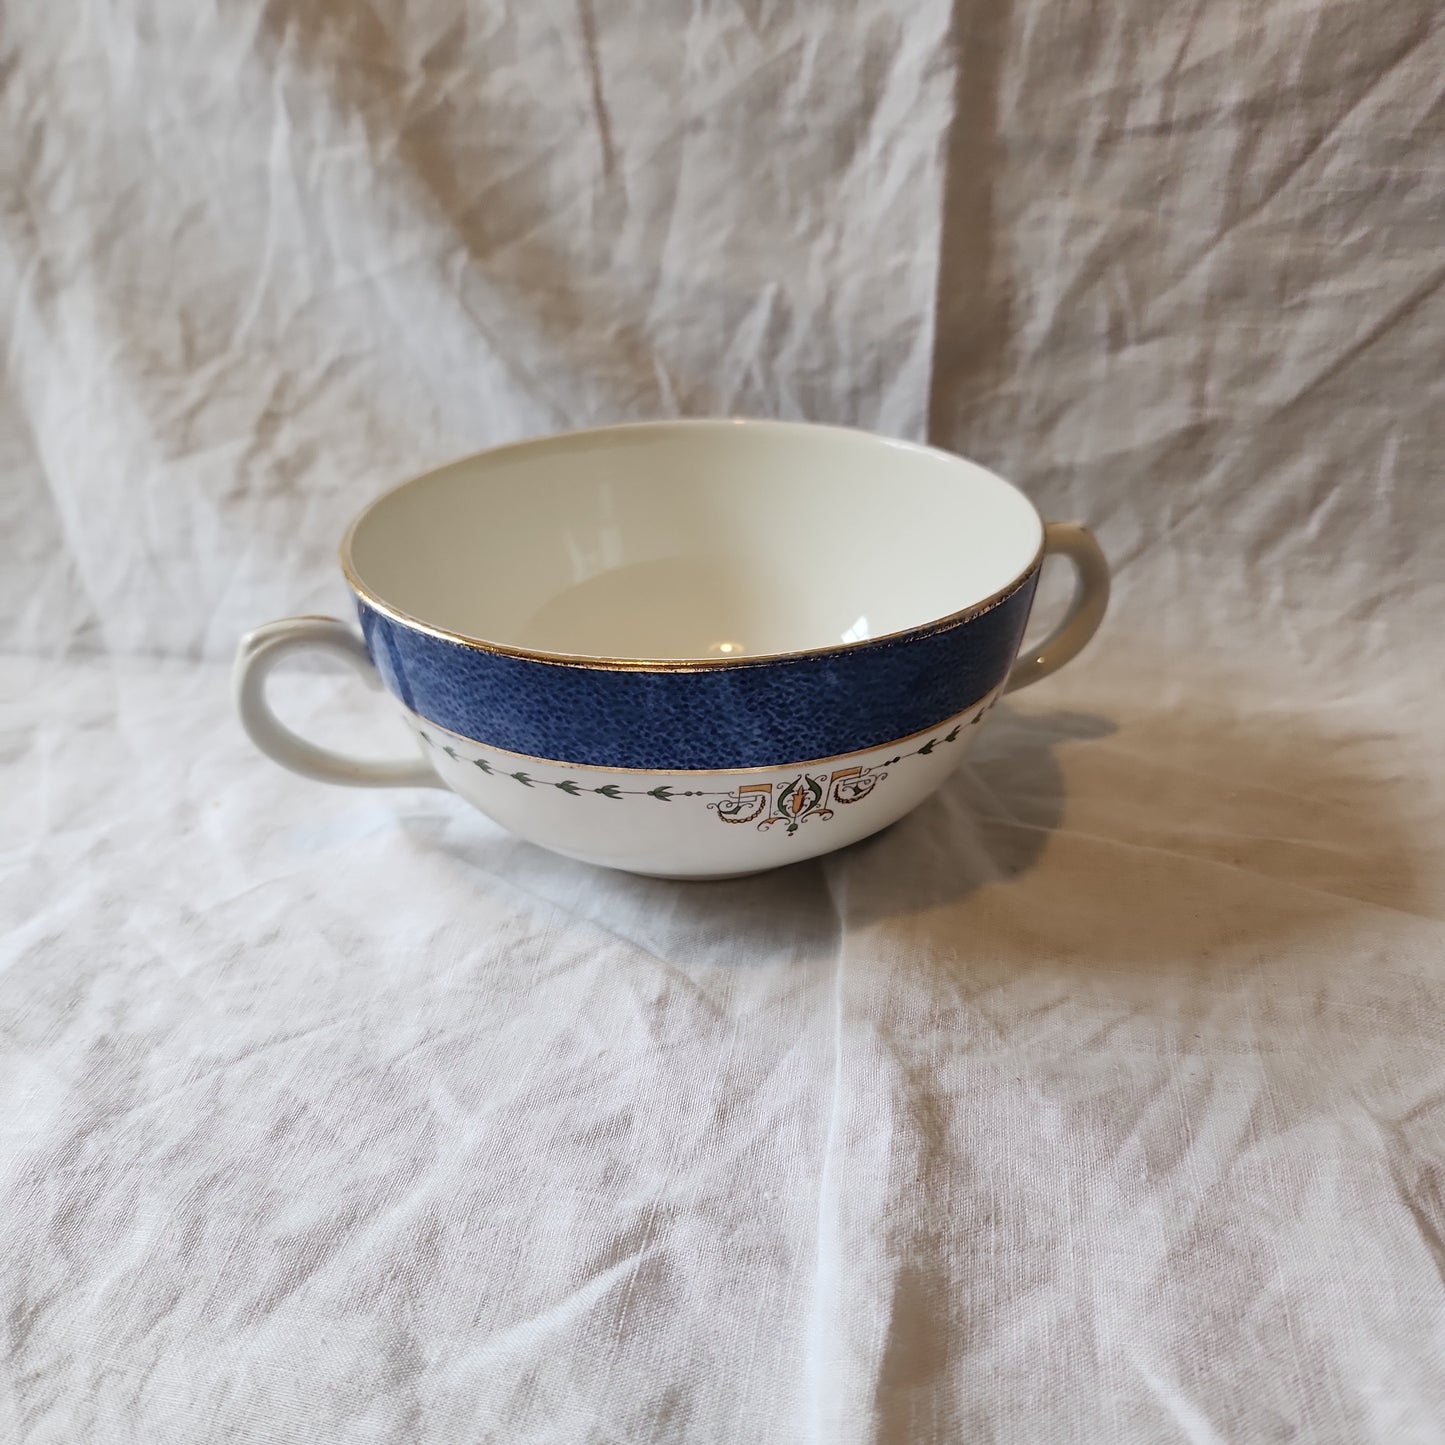 Kneeling and Co soup bowl with handle